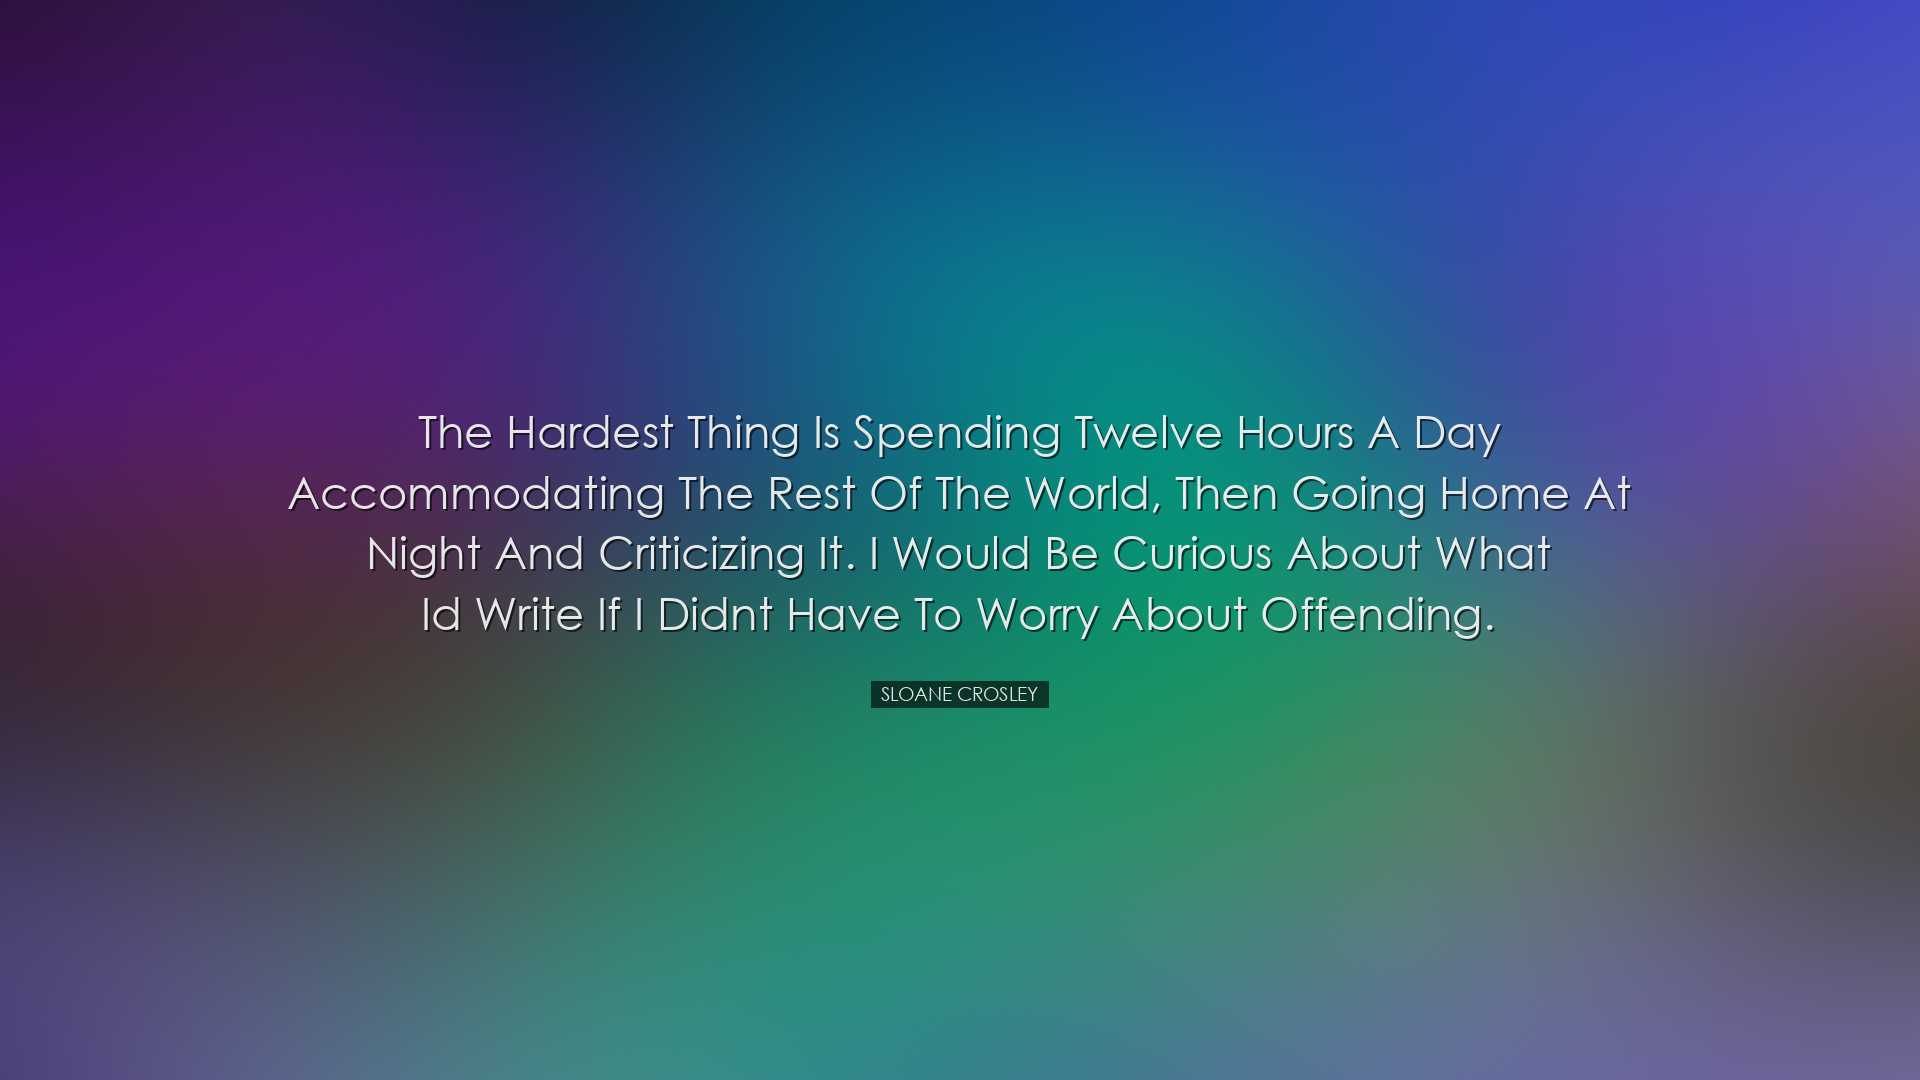 The hardest thing is spending twelve hours a day accommodating the